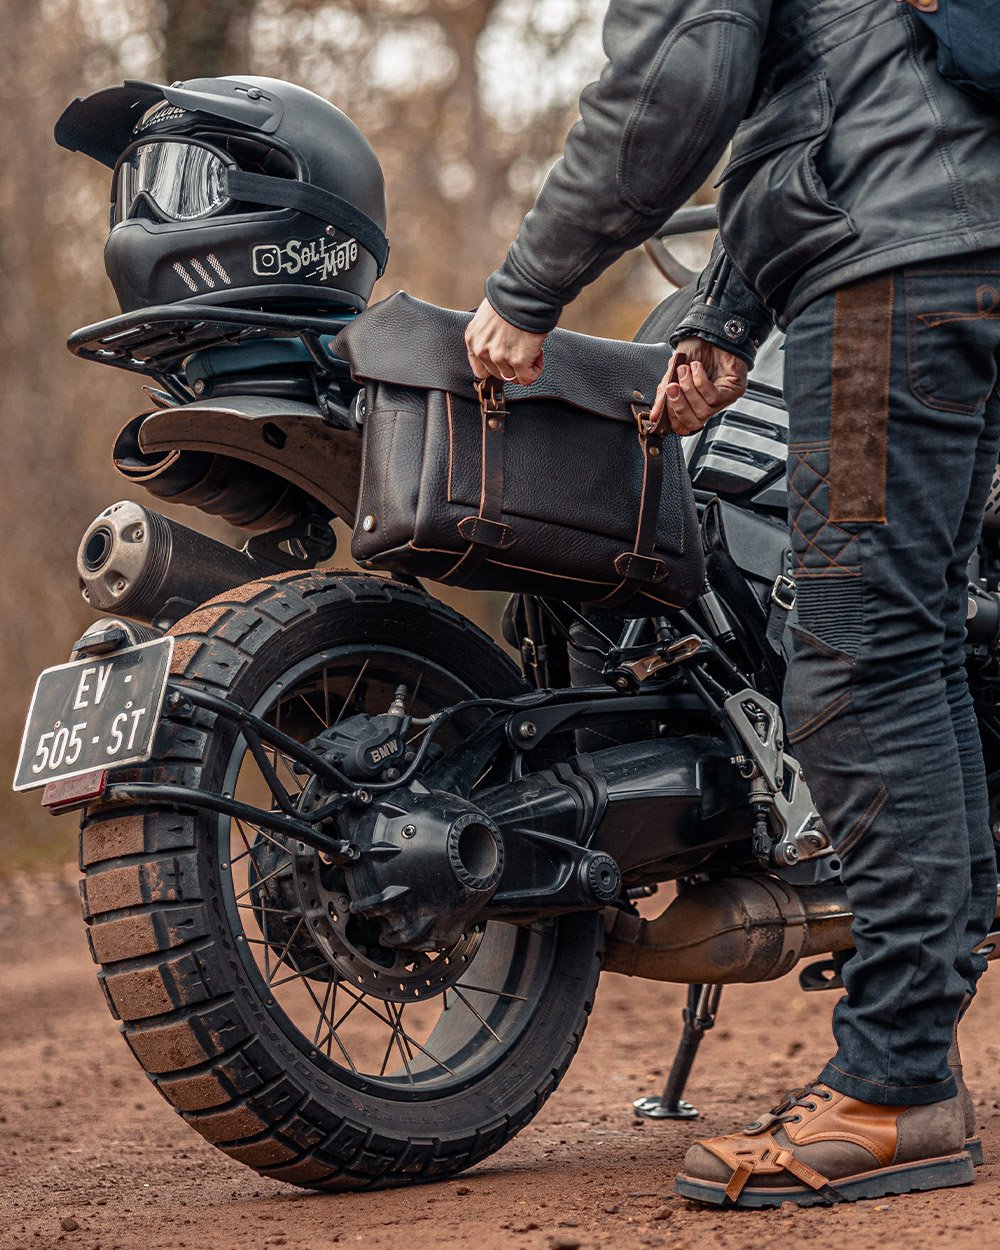 Men's leather bag attached to the back of a motorcycle